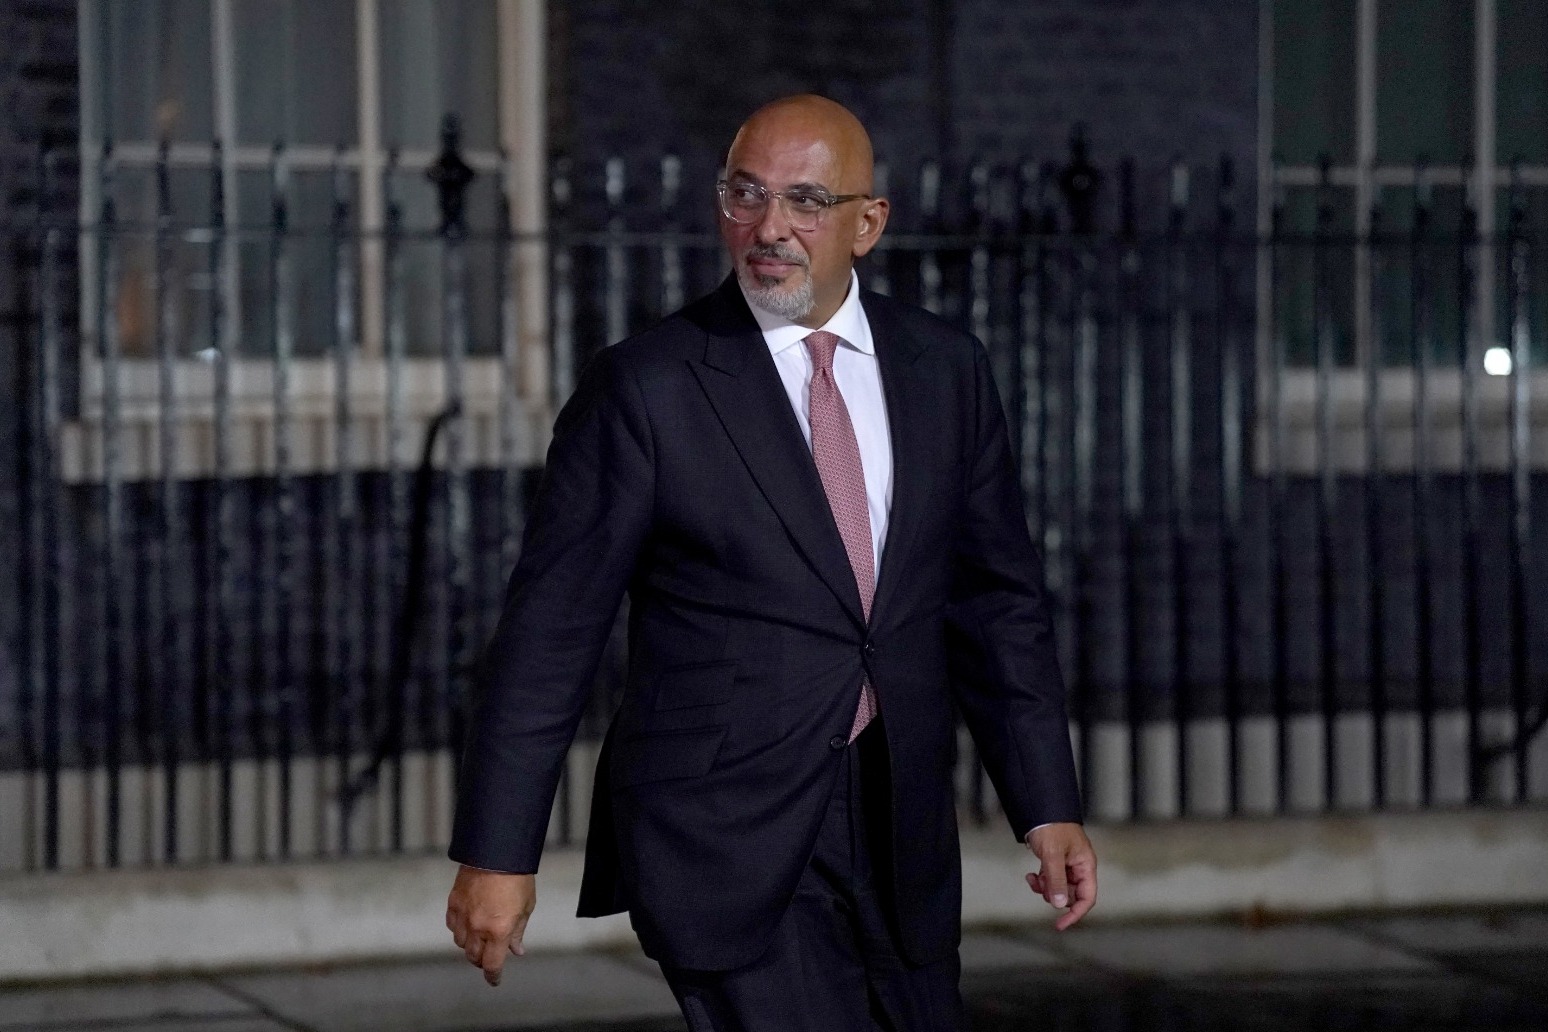 Nadhim Zahawi: British Islands will be at the heart of levelling up 